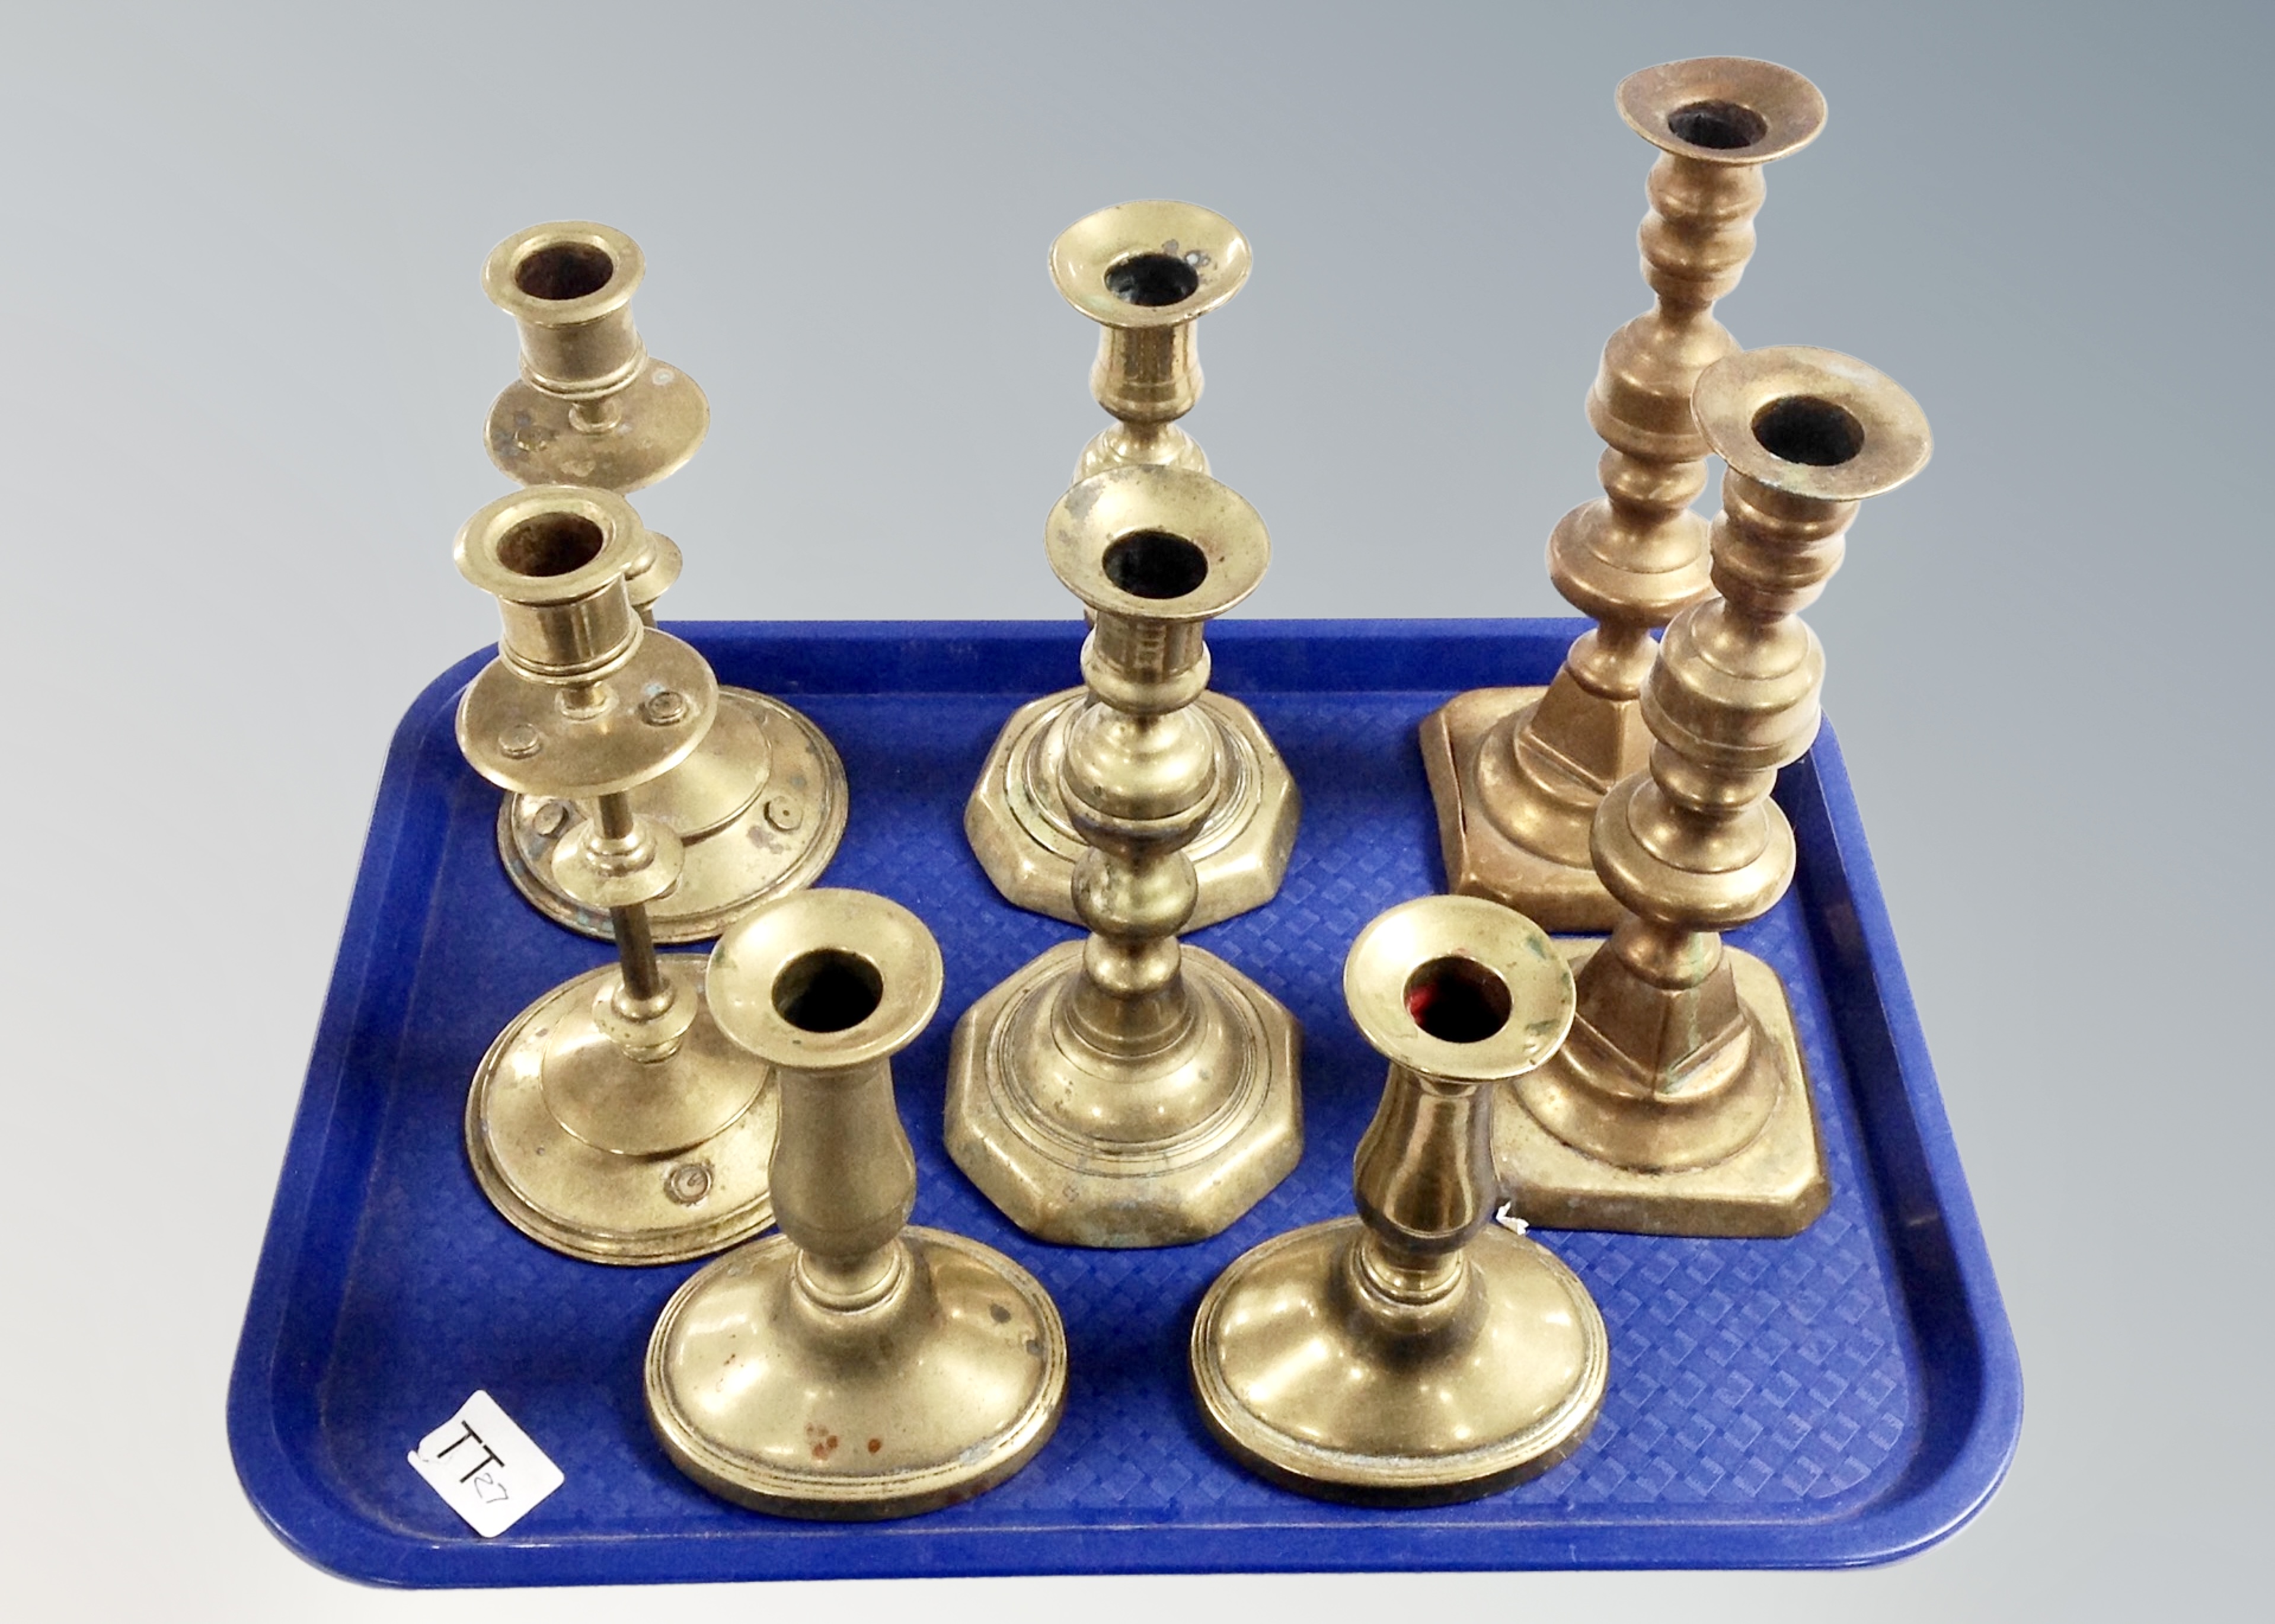 Four pairs of brass candlesticks.